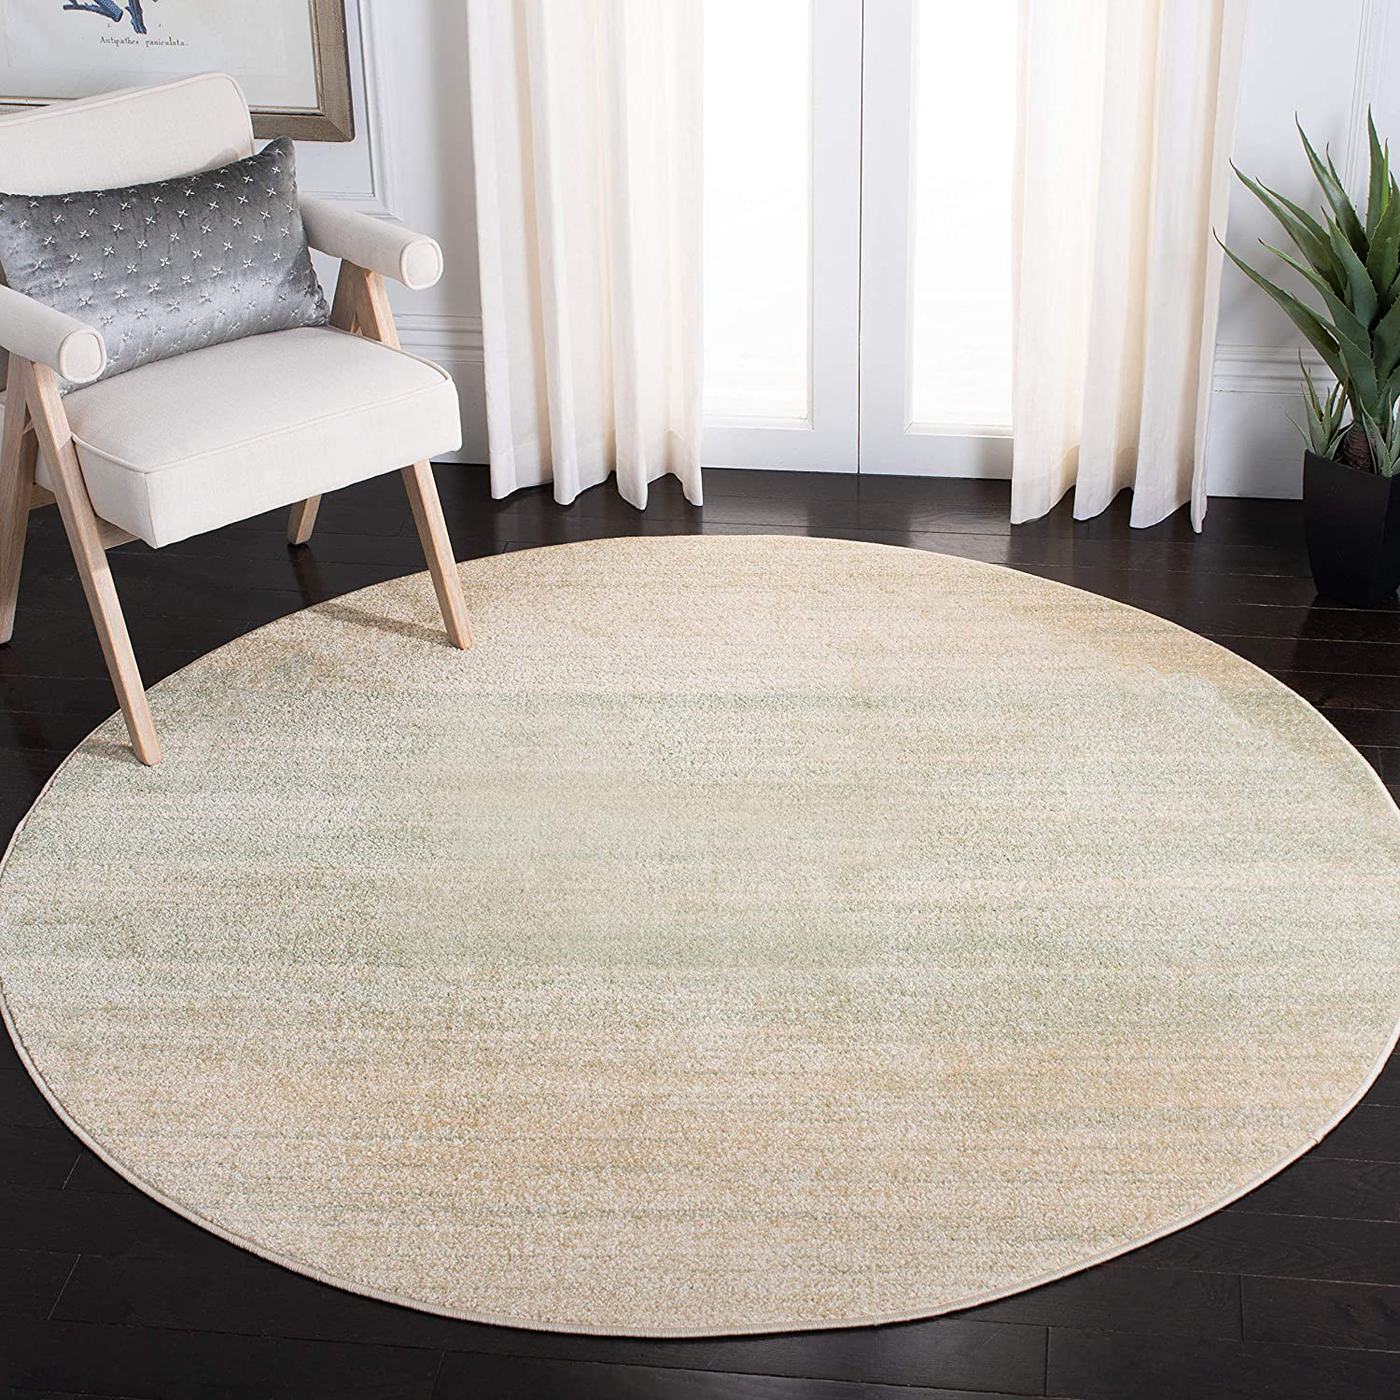 Safavieh Adirondack Collection ADR142Y Modern Ombre Area Rug, 6' x 6' Round, Green / Ivory